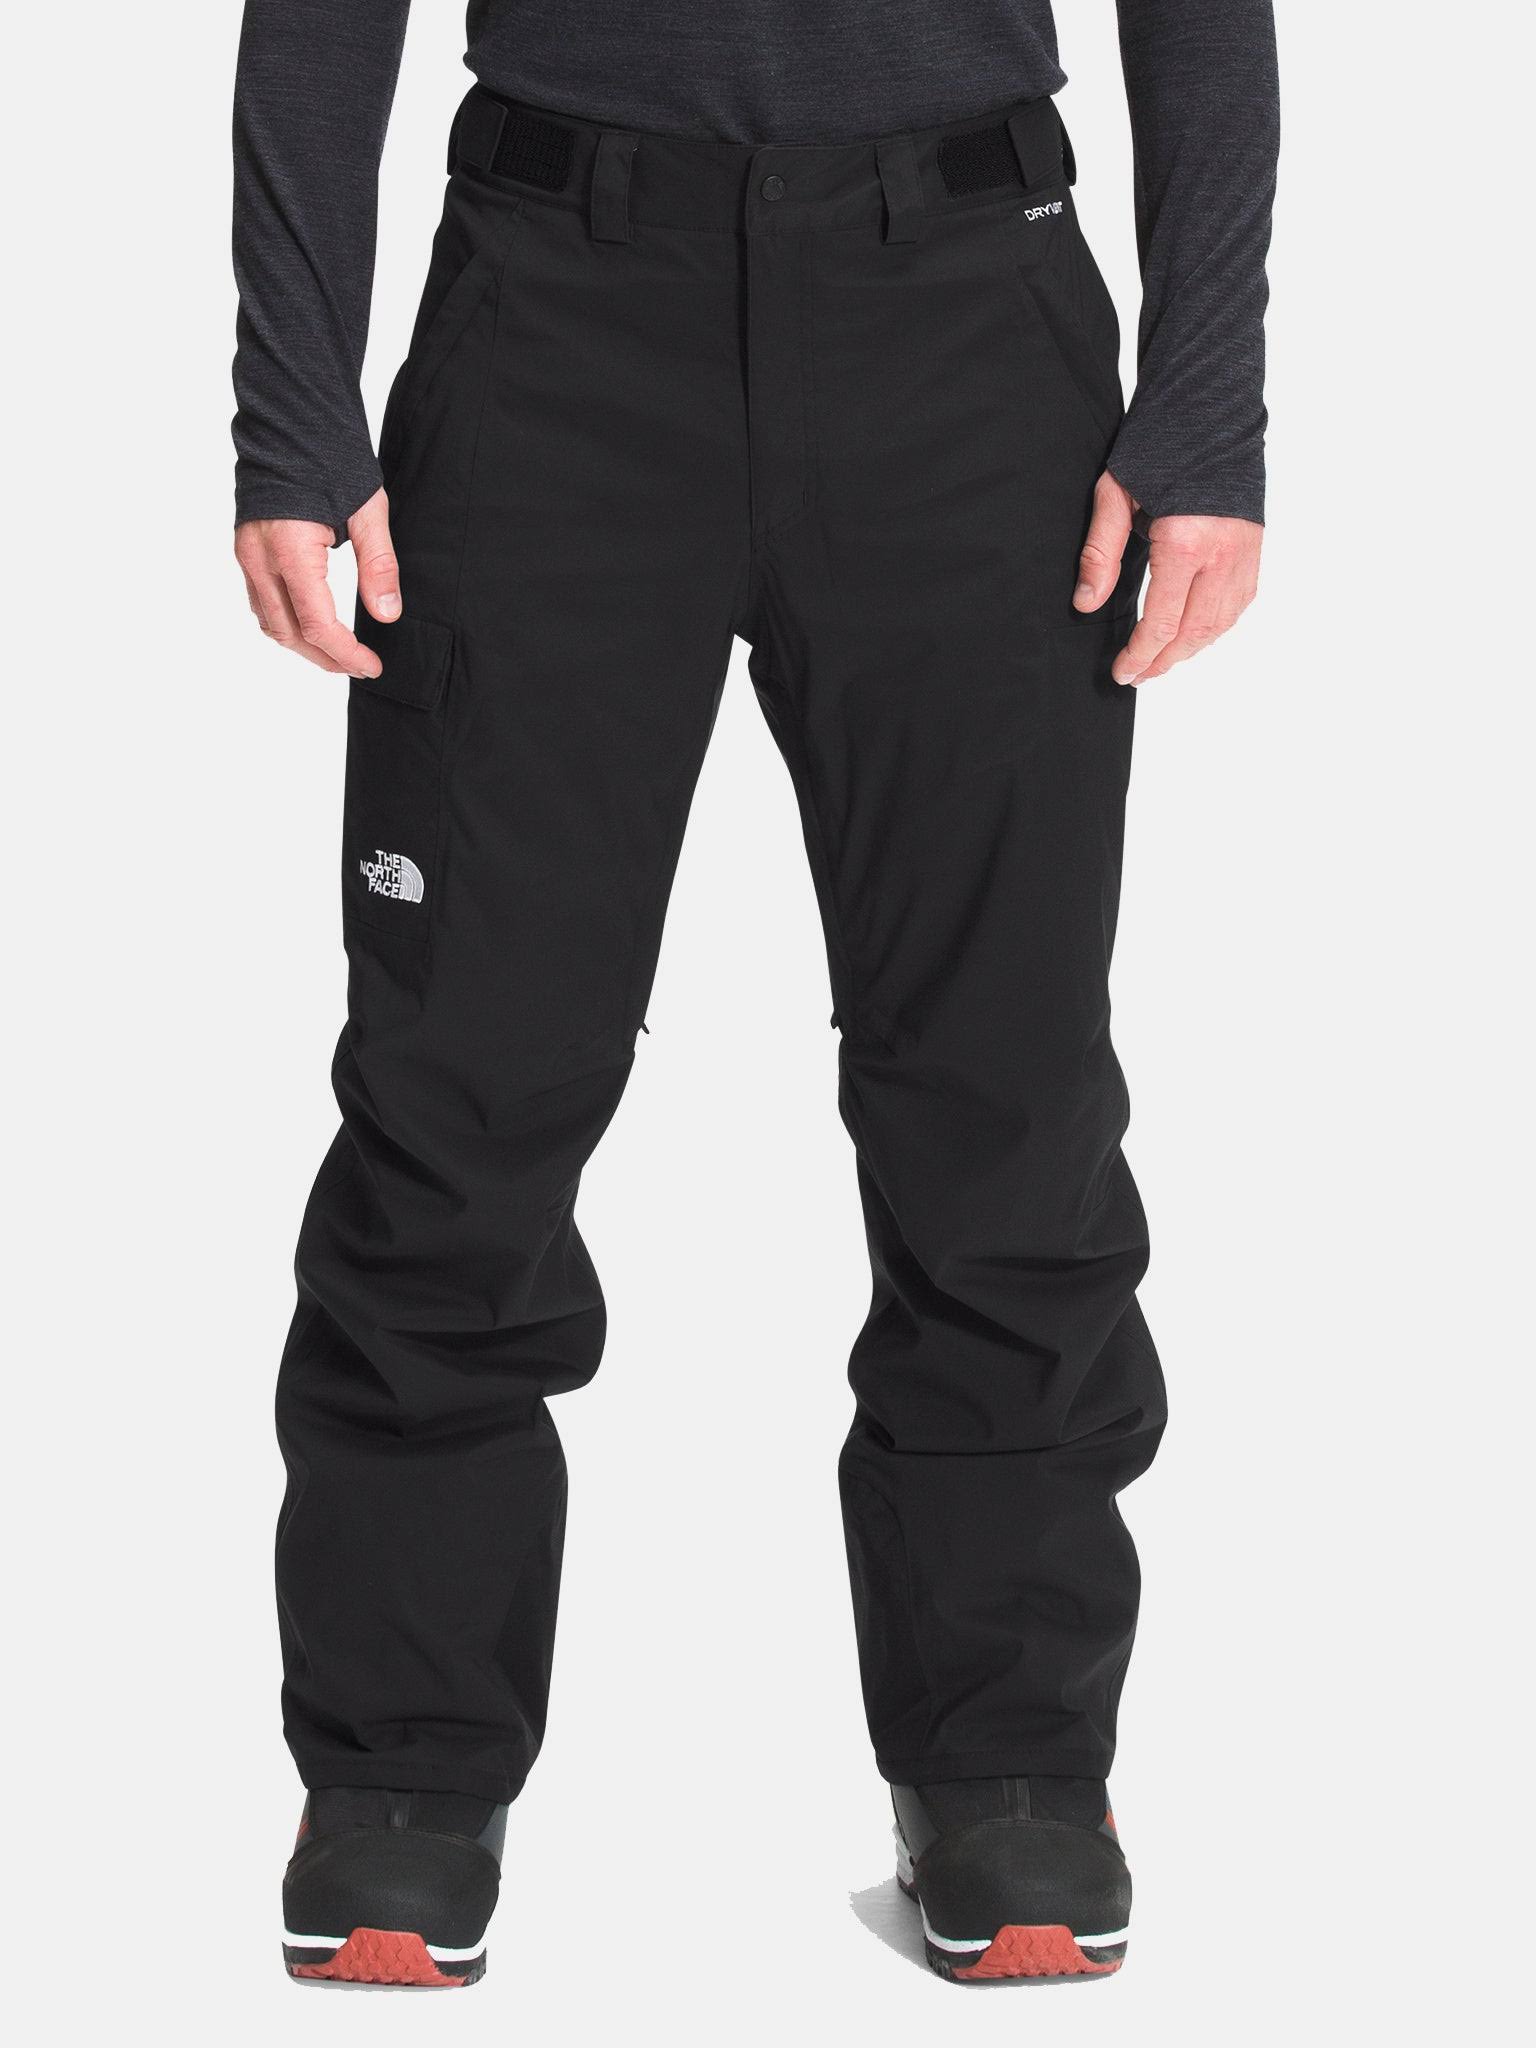 The North Face Men's Freedom Insulated Trousers Black - Size: M Short